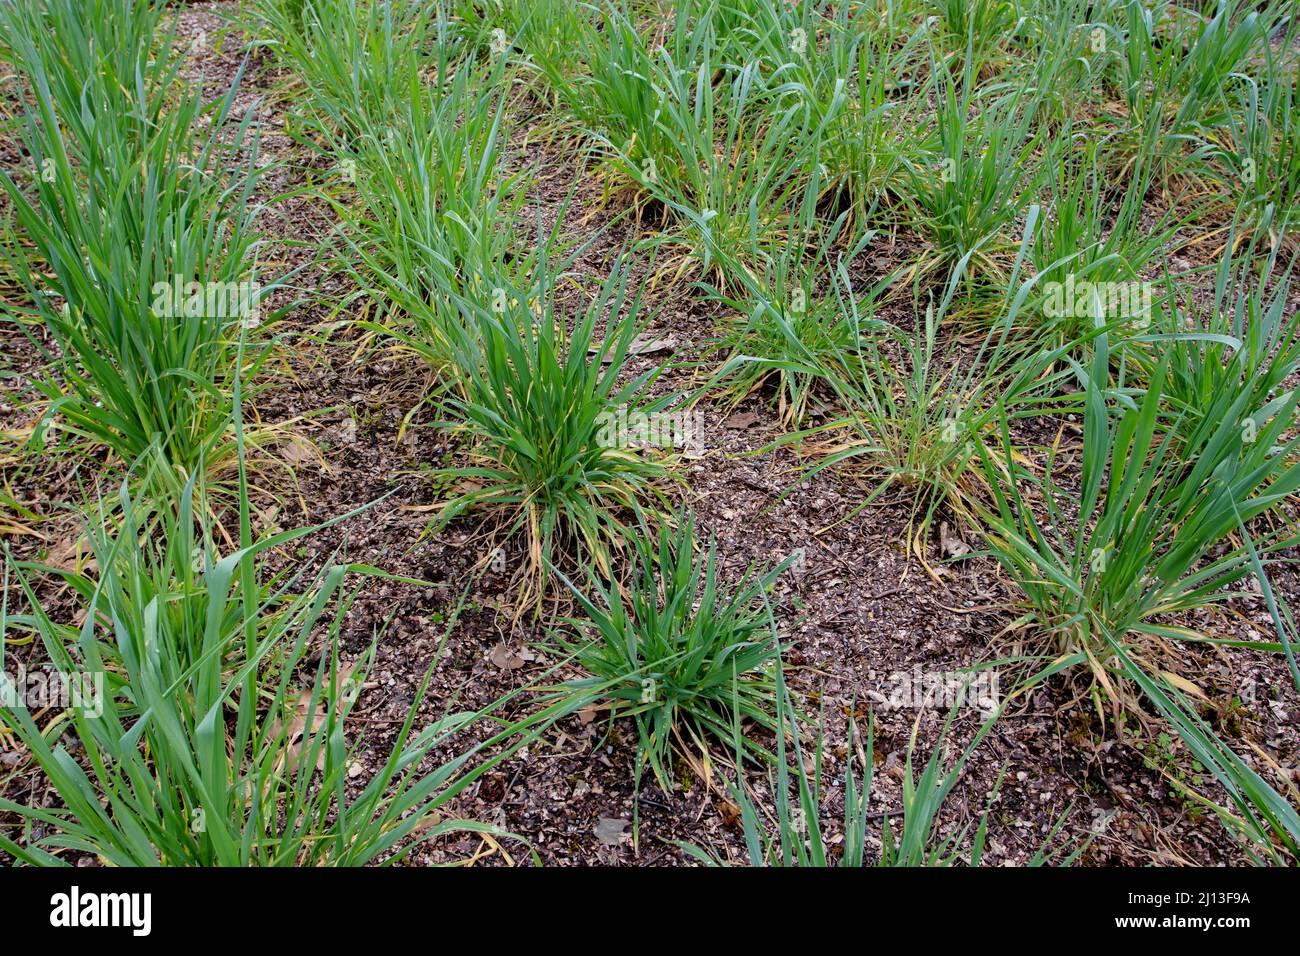 Cultivated rye plants in the tillering stage. Secale cereale. Stock Photo